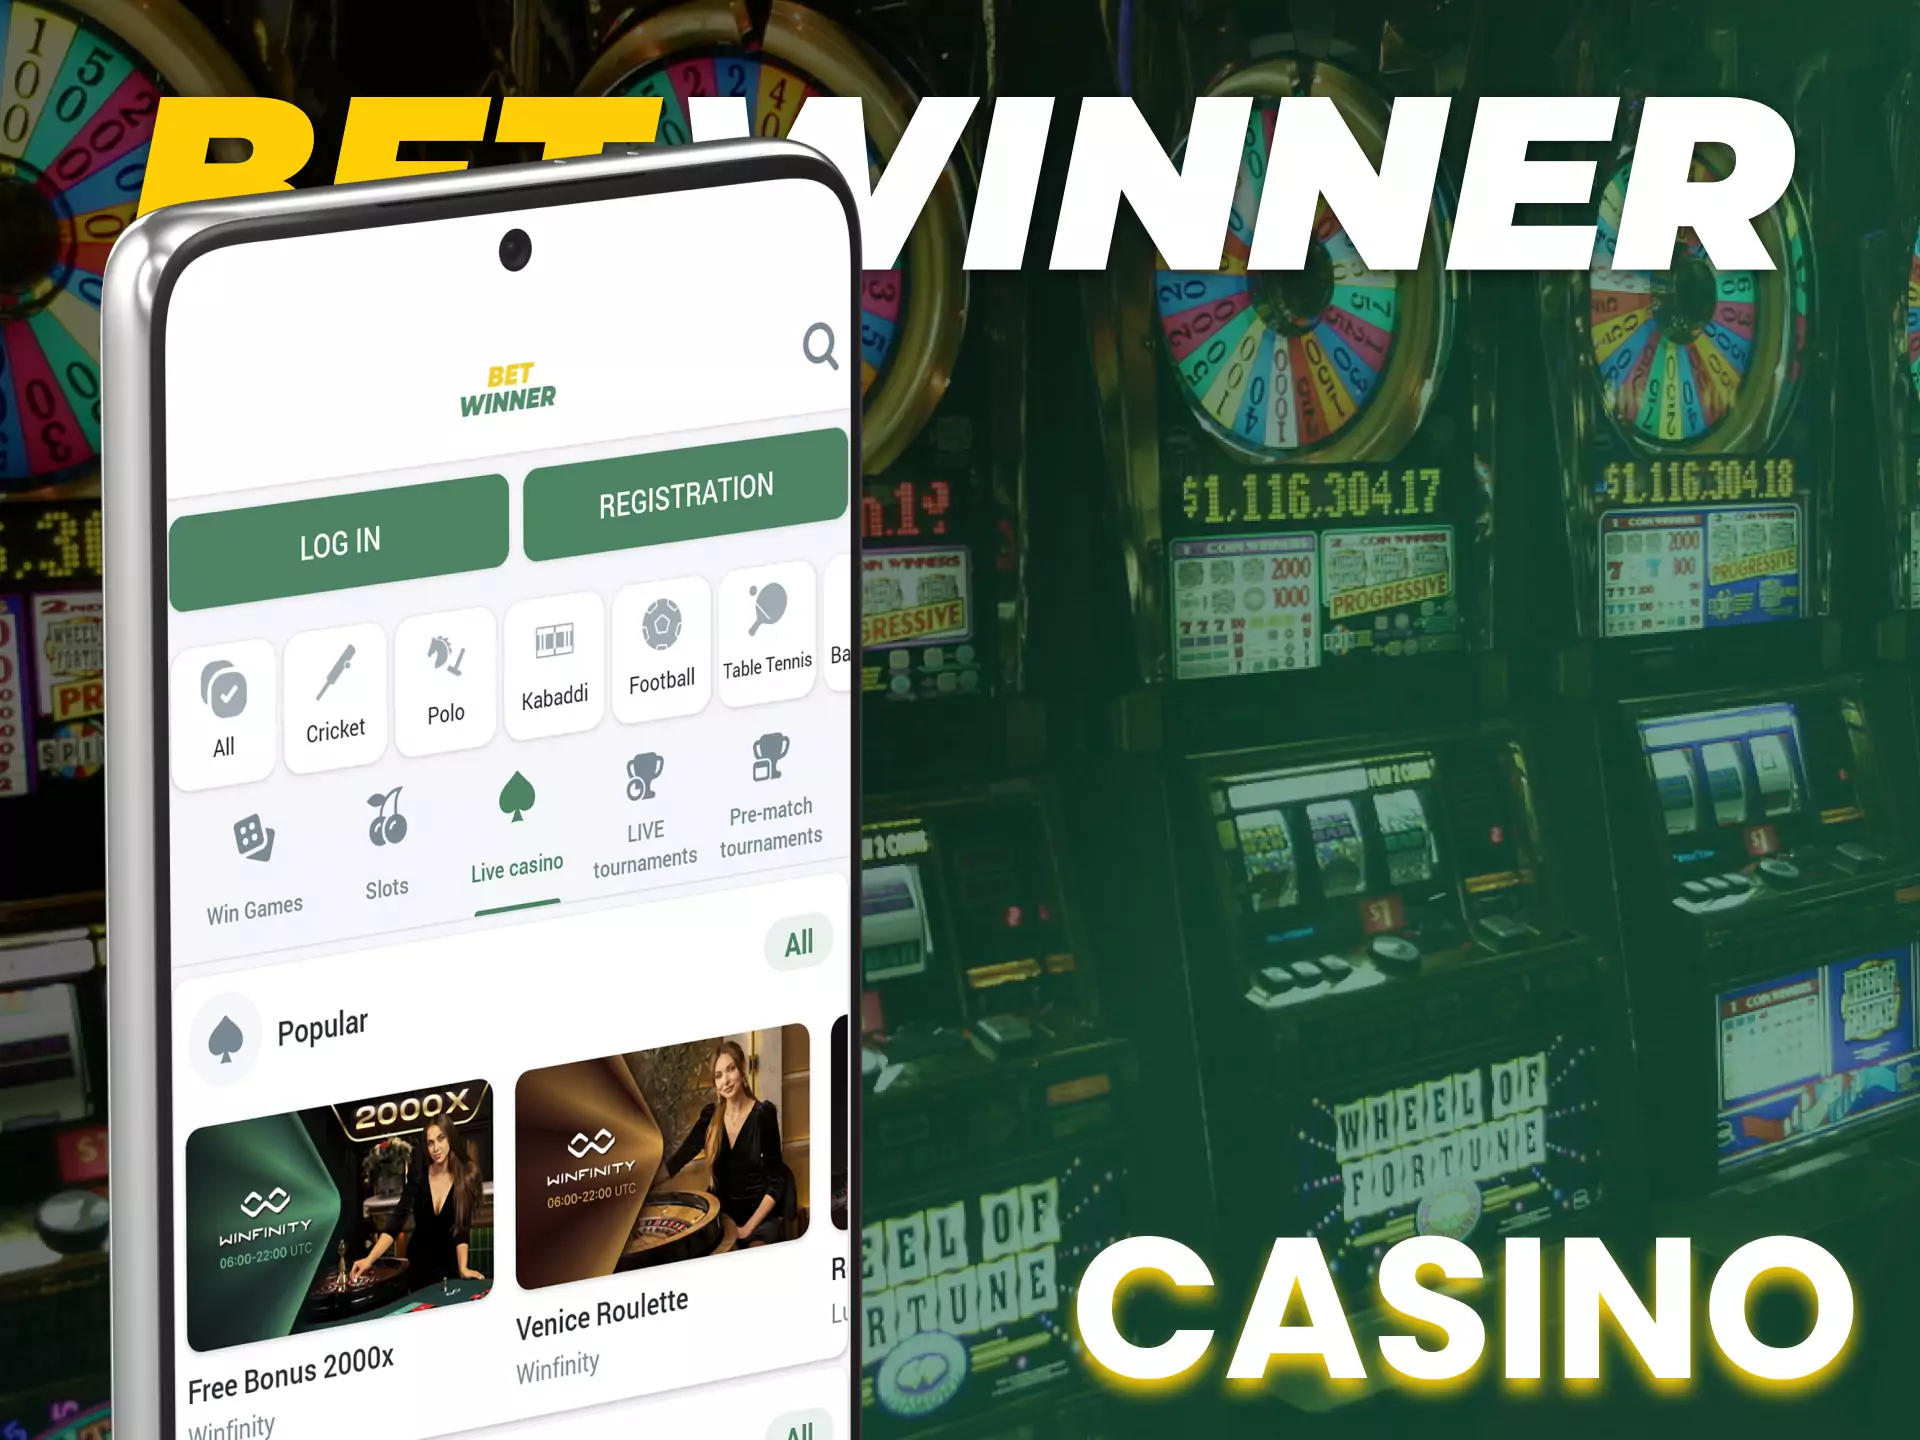 In the Betwinner app, be sure to visit the Casino section.